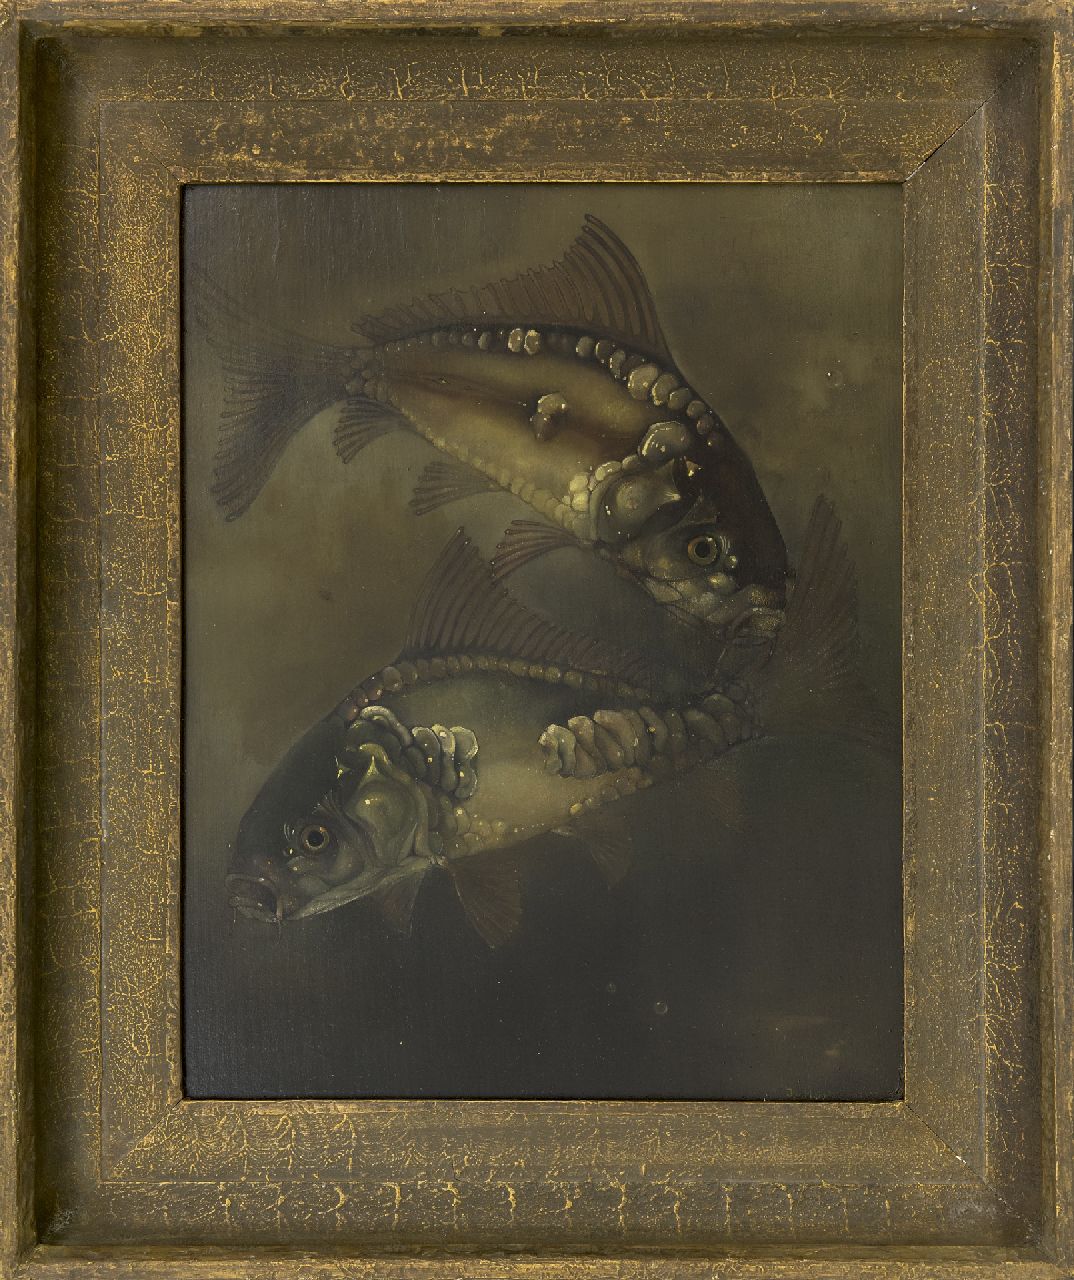 Hoboken J. van | Jacoba 'Jemmy' van Hoboken | Paintings offered for sale | Mirror carps, oil on panel 40.2 x 32.3 cm, signed l.r. and dated 1932